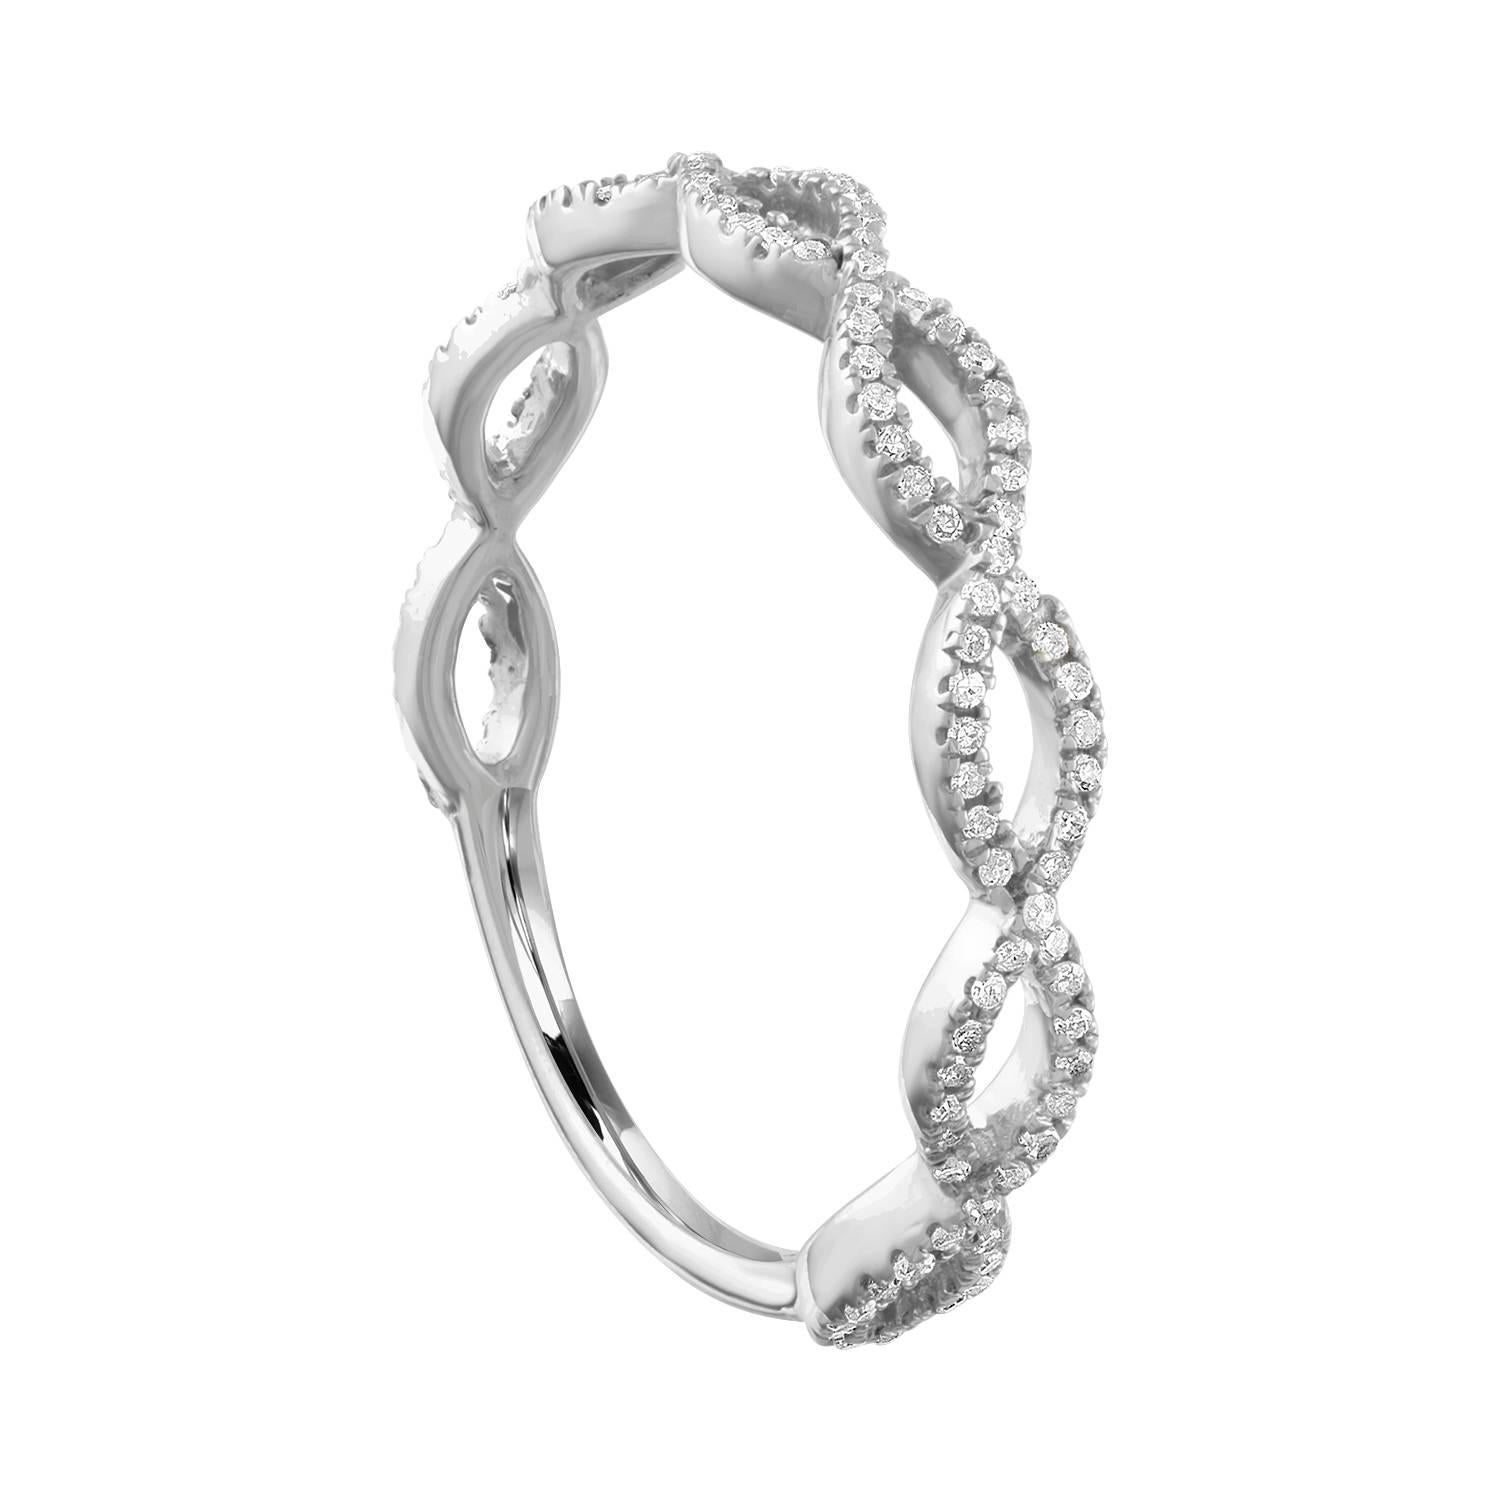 Beautiful Infinity Design Band Ring.
The ring is 14K White Gold.
There are 0.17 Carats in Diamonds H I1.
The ring is a size 7, sizable.
The ring weighs 1.6 grams.